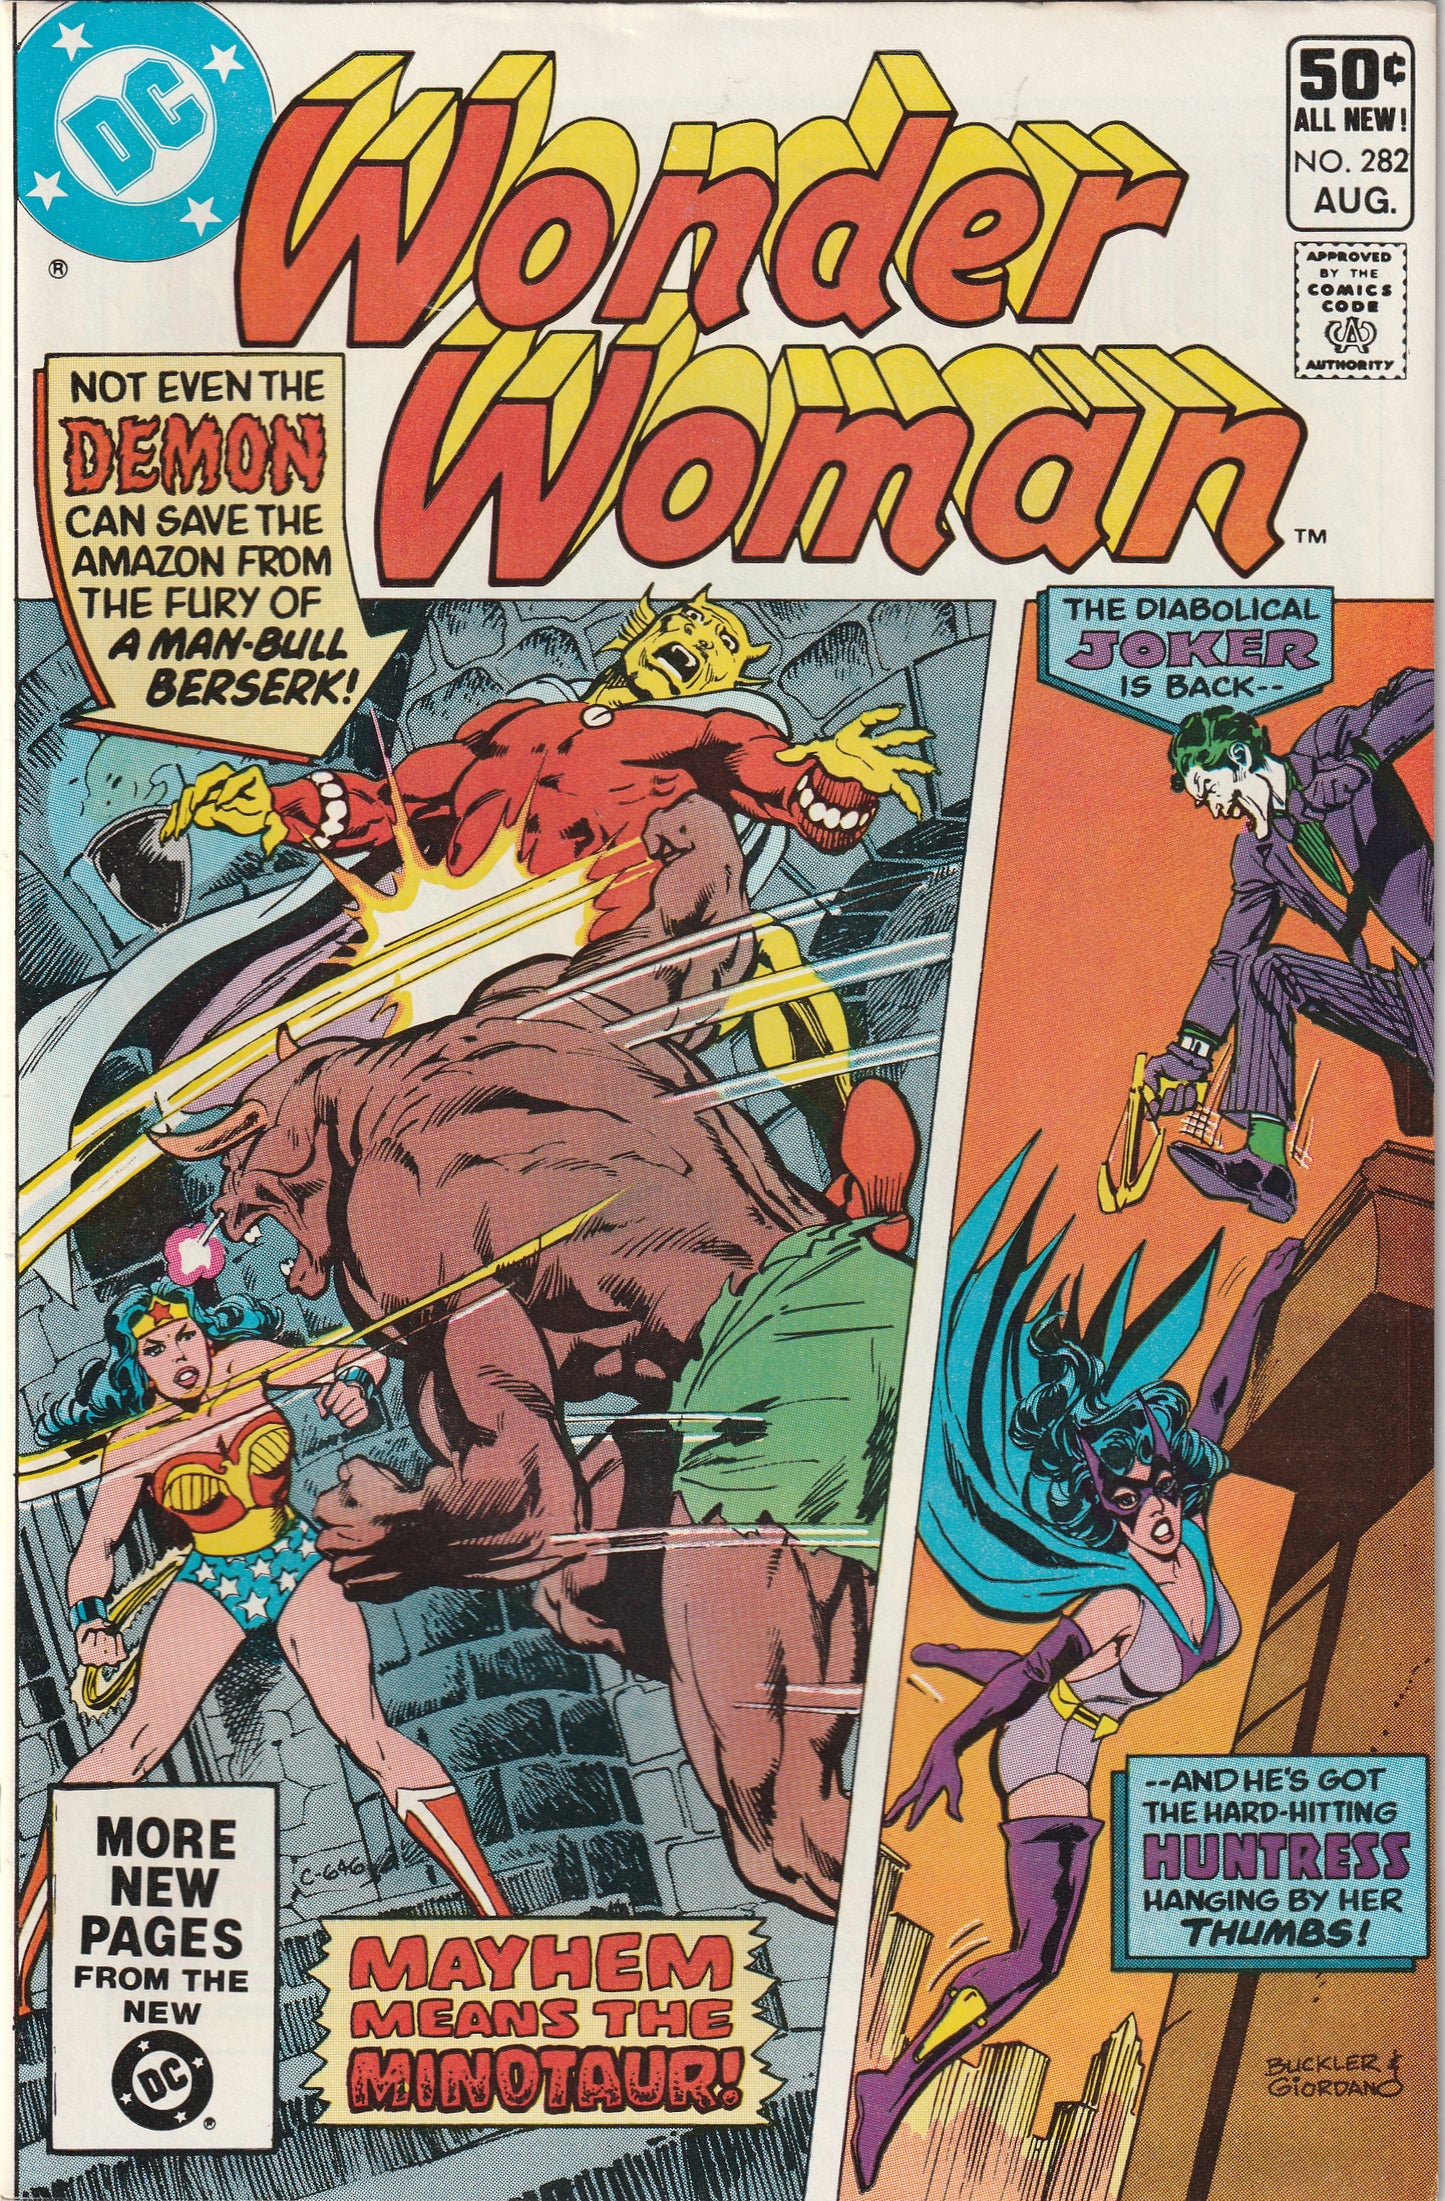 Wonder Woman #282 (1981) - Featuring The Huntress